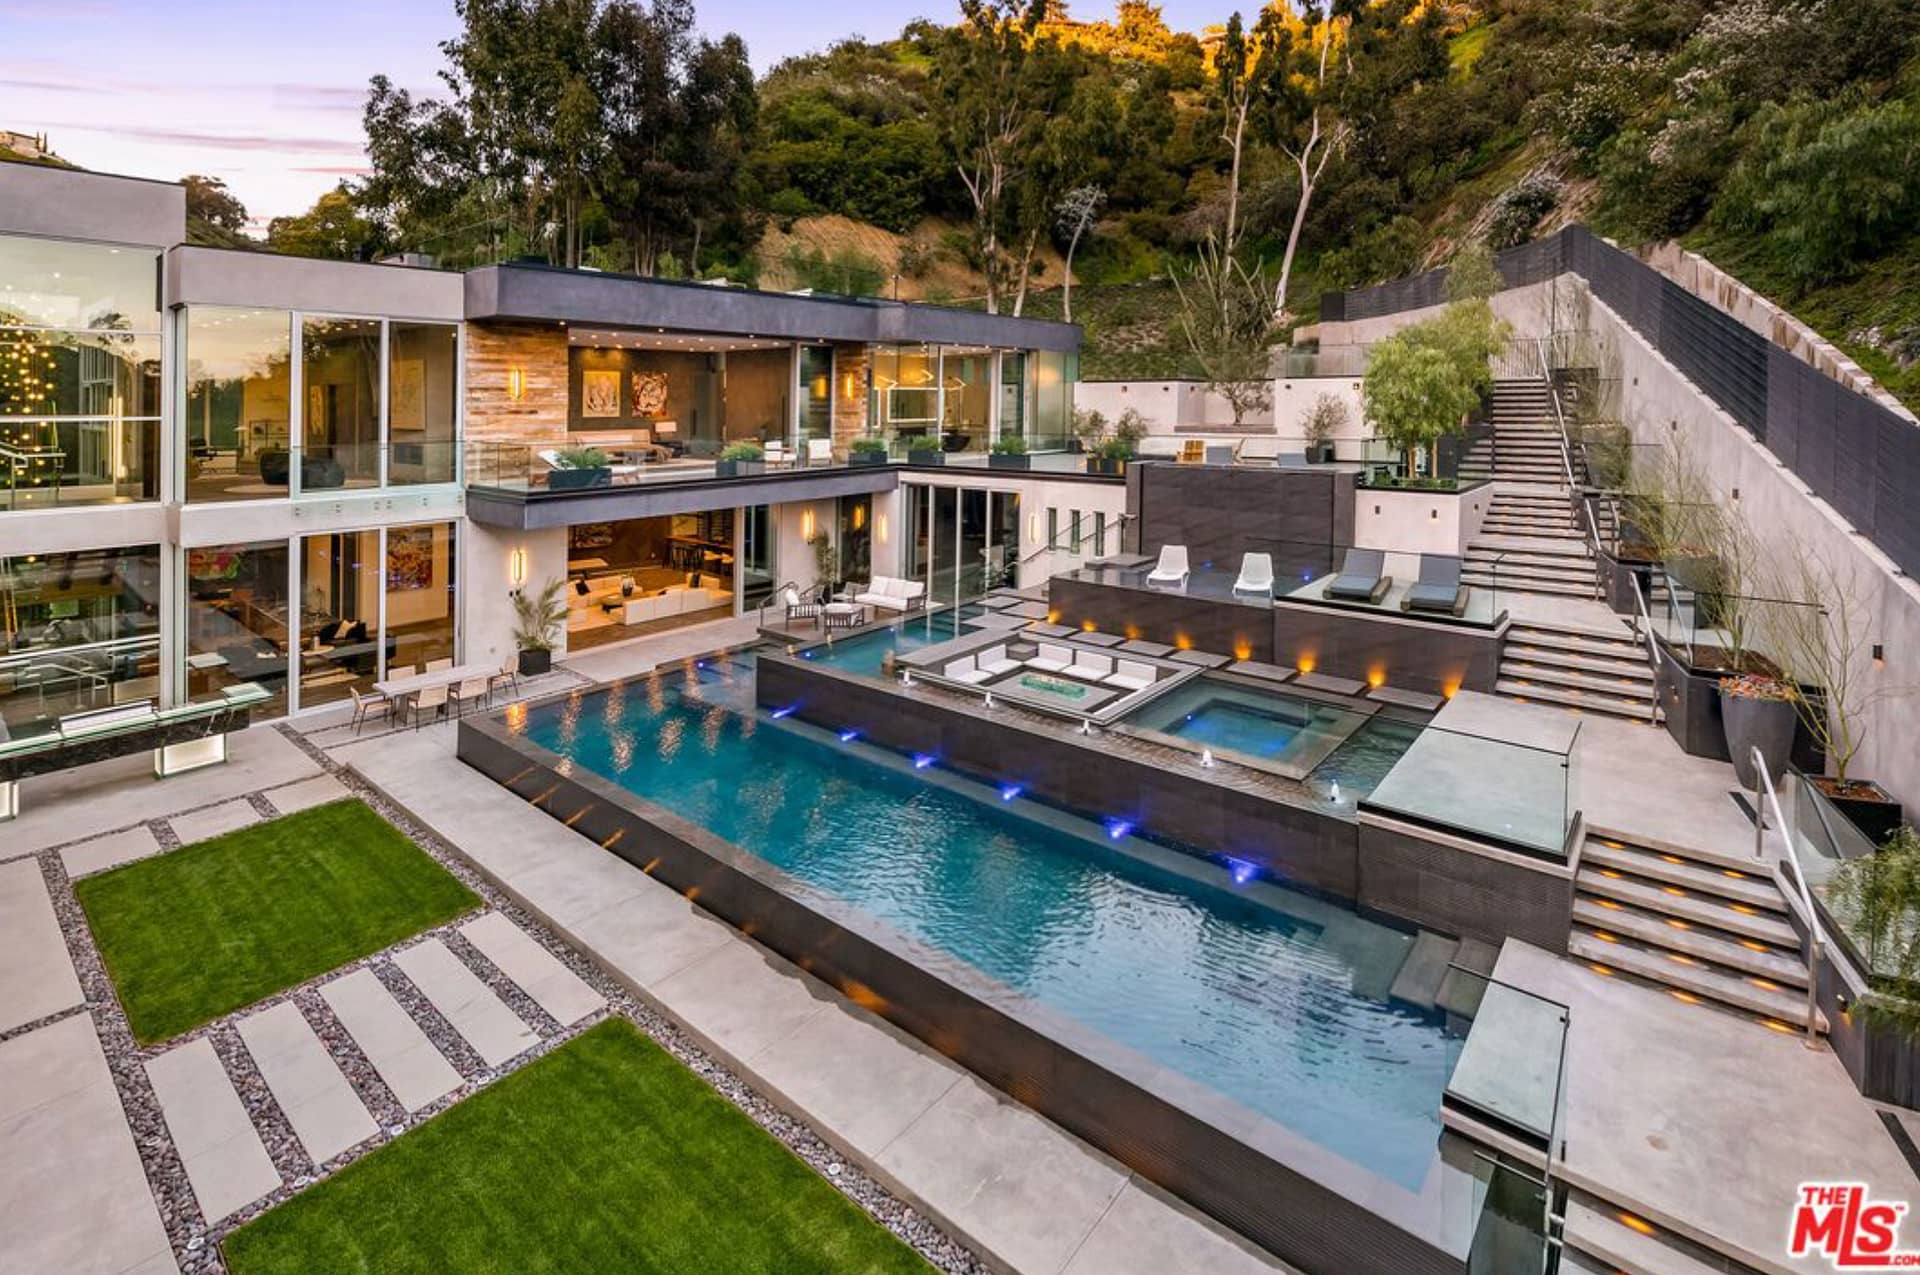 $35 Million Modern New Build In Los Angeles (PHOTOS)